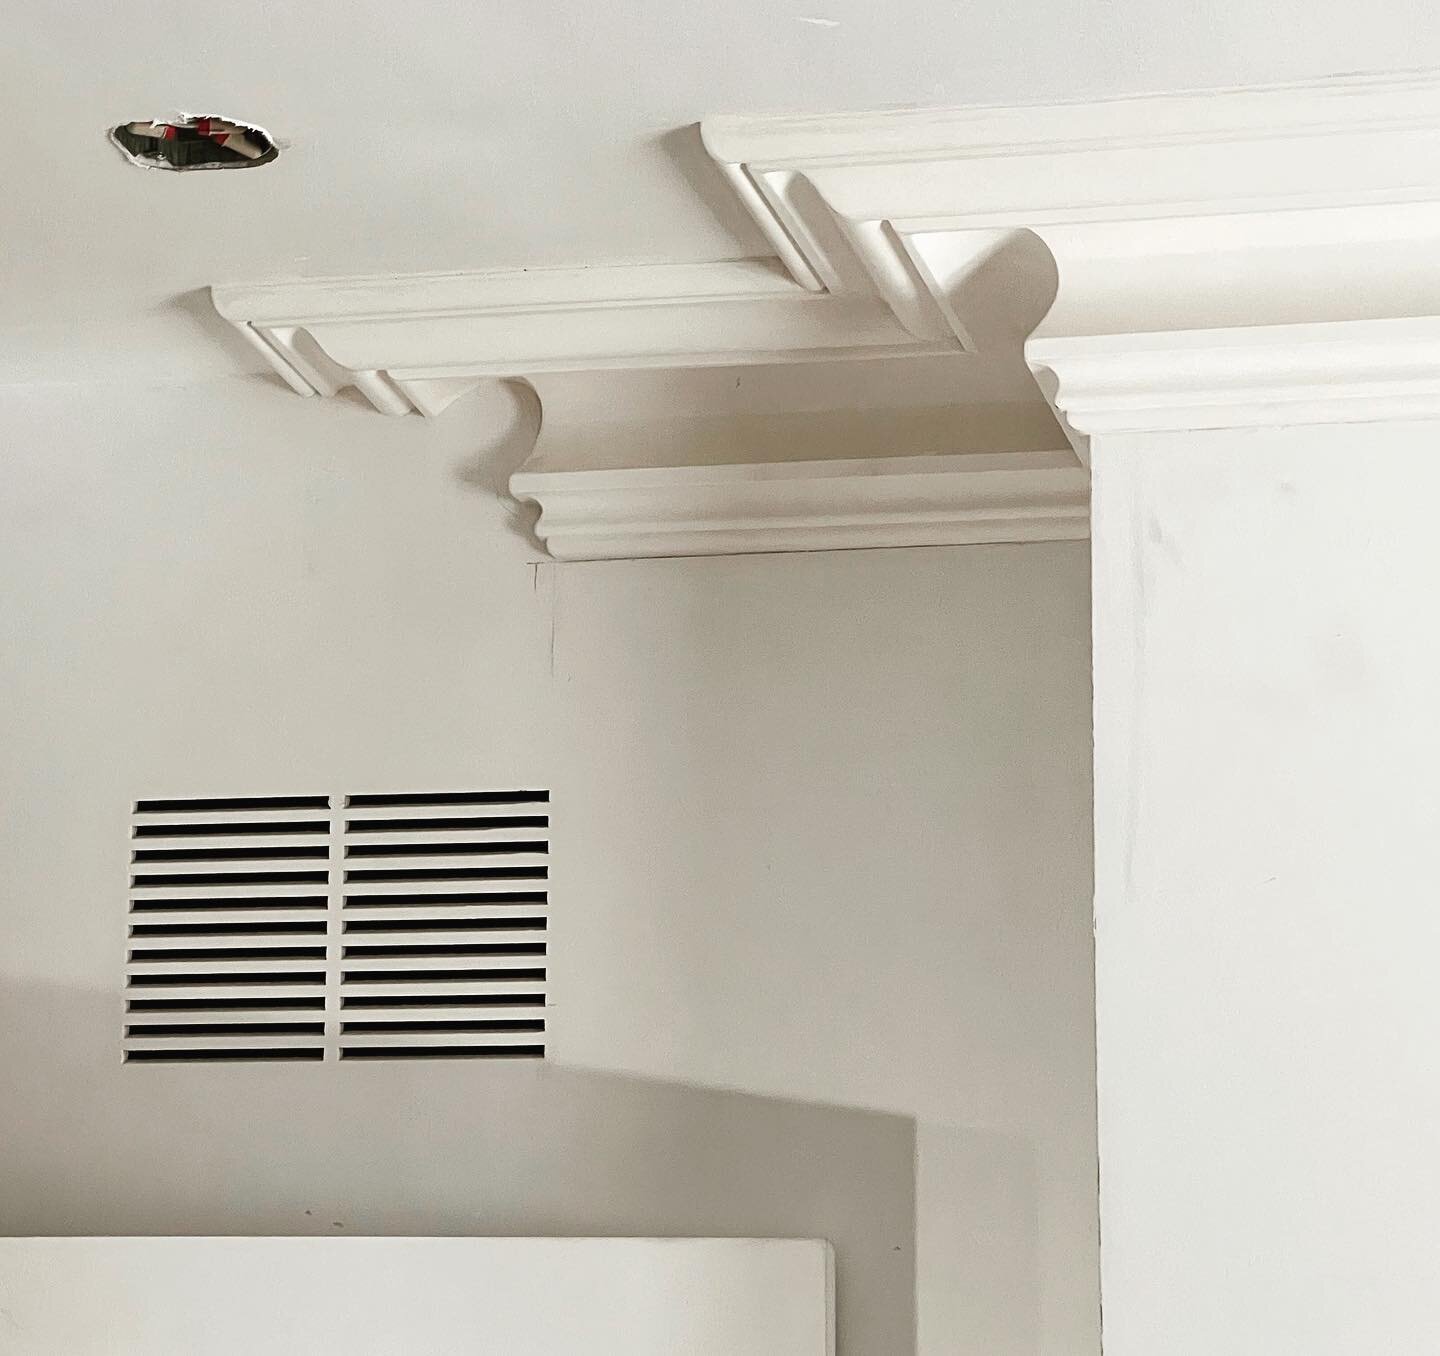 Plaster crown moulding is making a comeback!